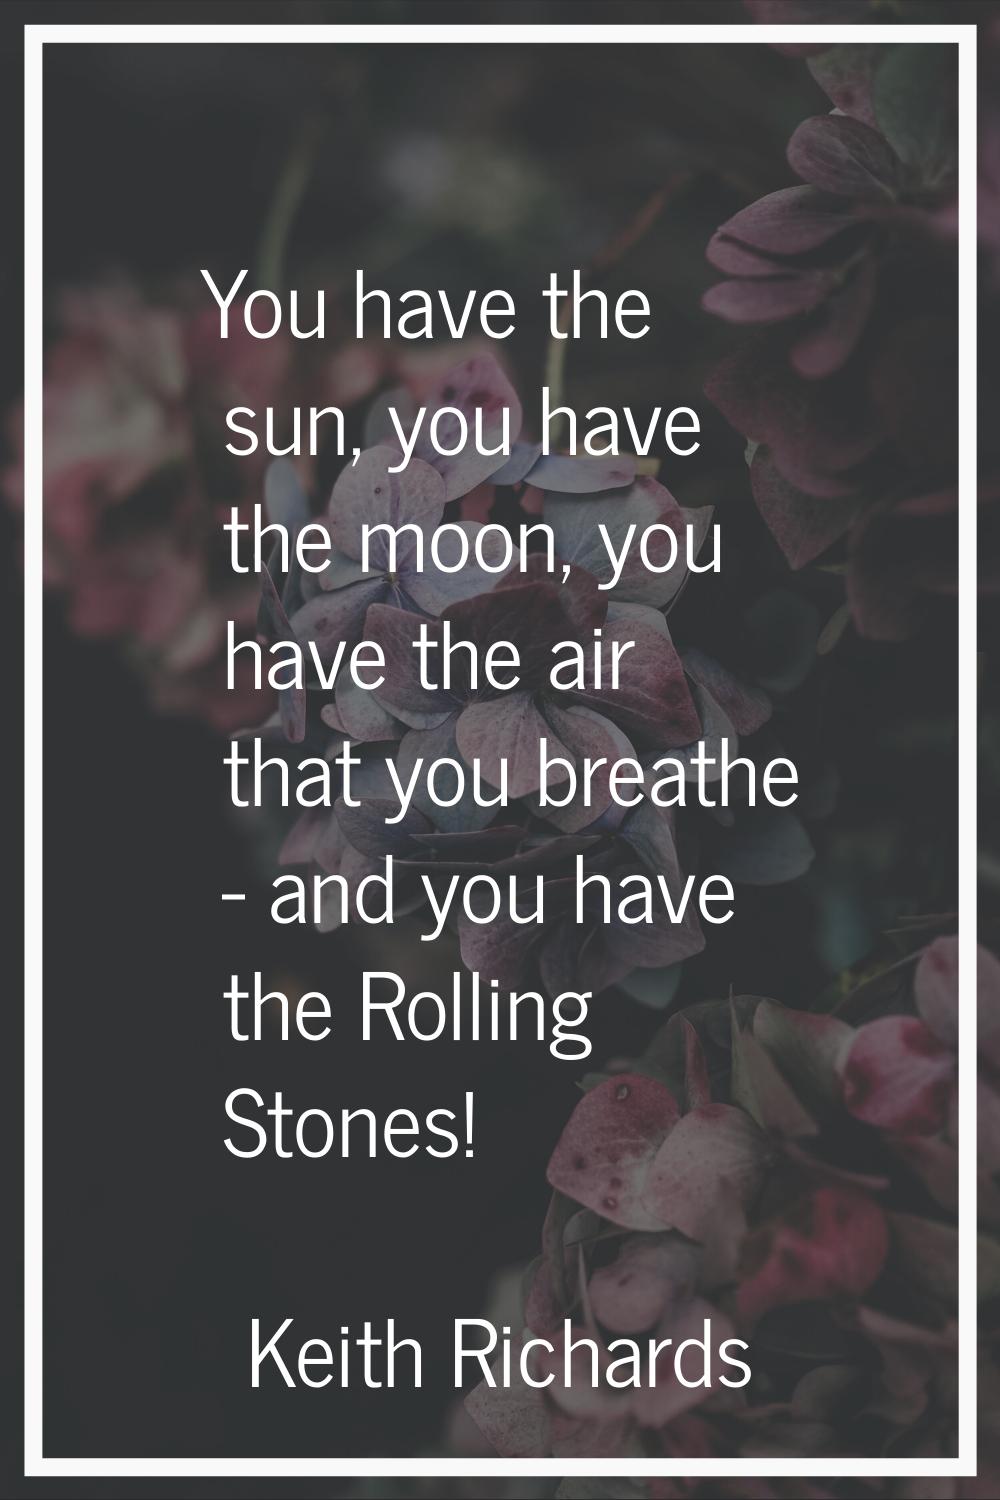 You have the sun, you have the moon, you have the air that you breathe - and you have the Rolling S